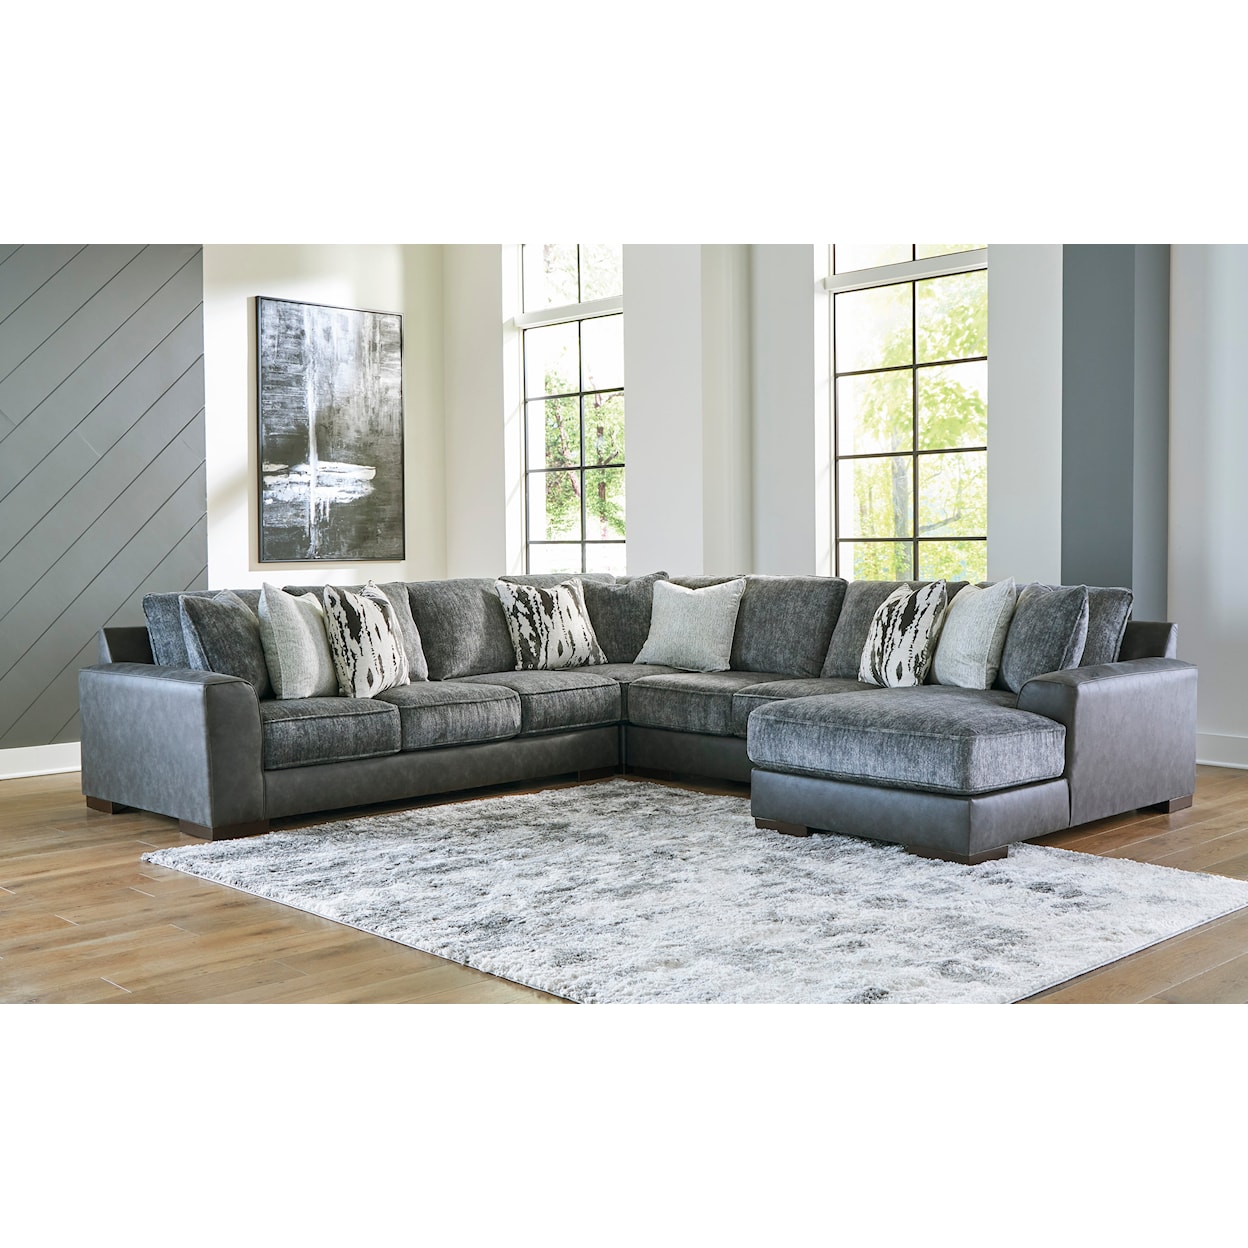 Michael Alan Select Larkstone Sectional Sofa with Chaise